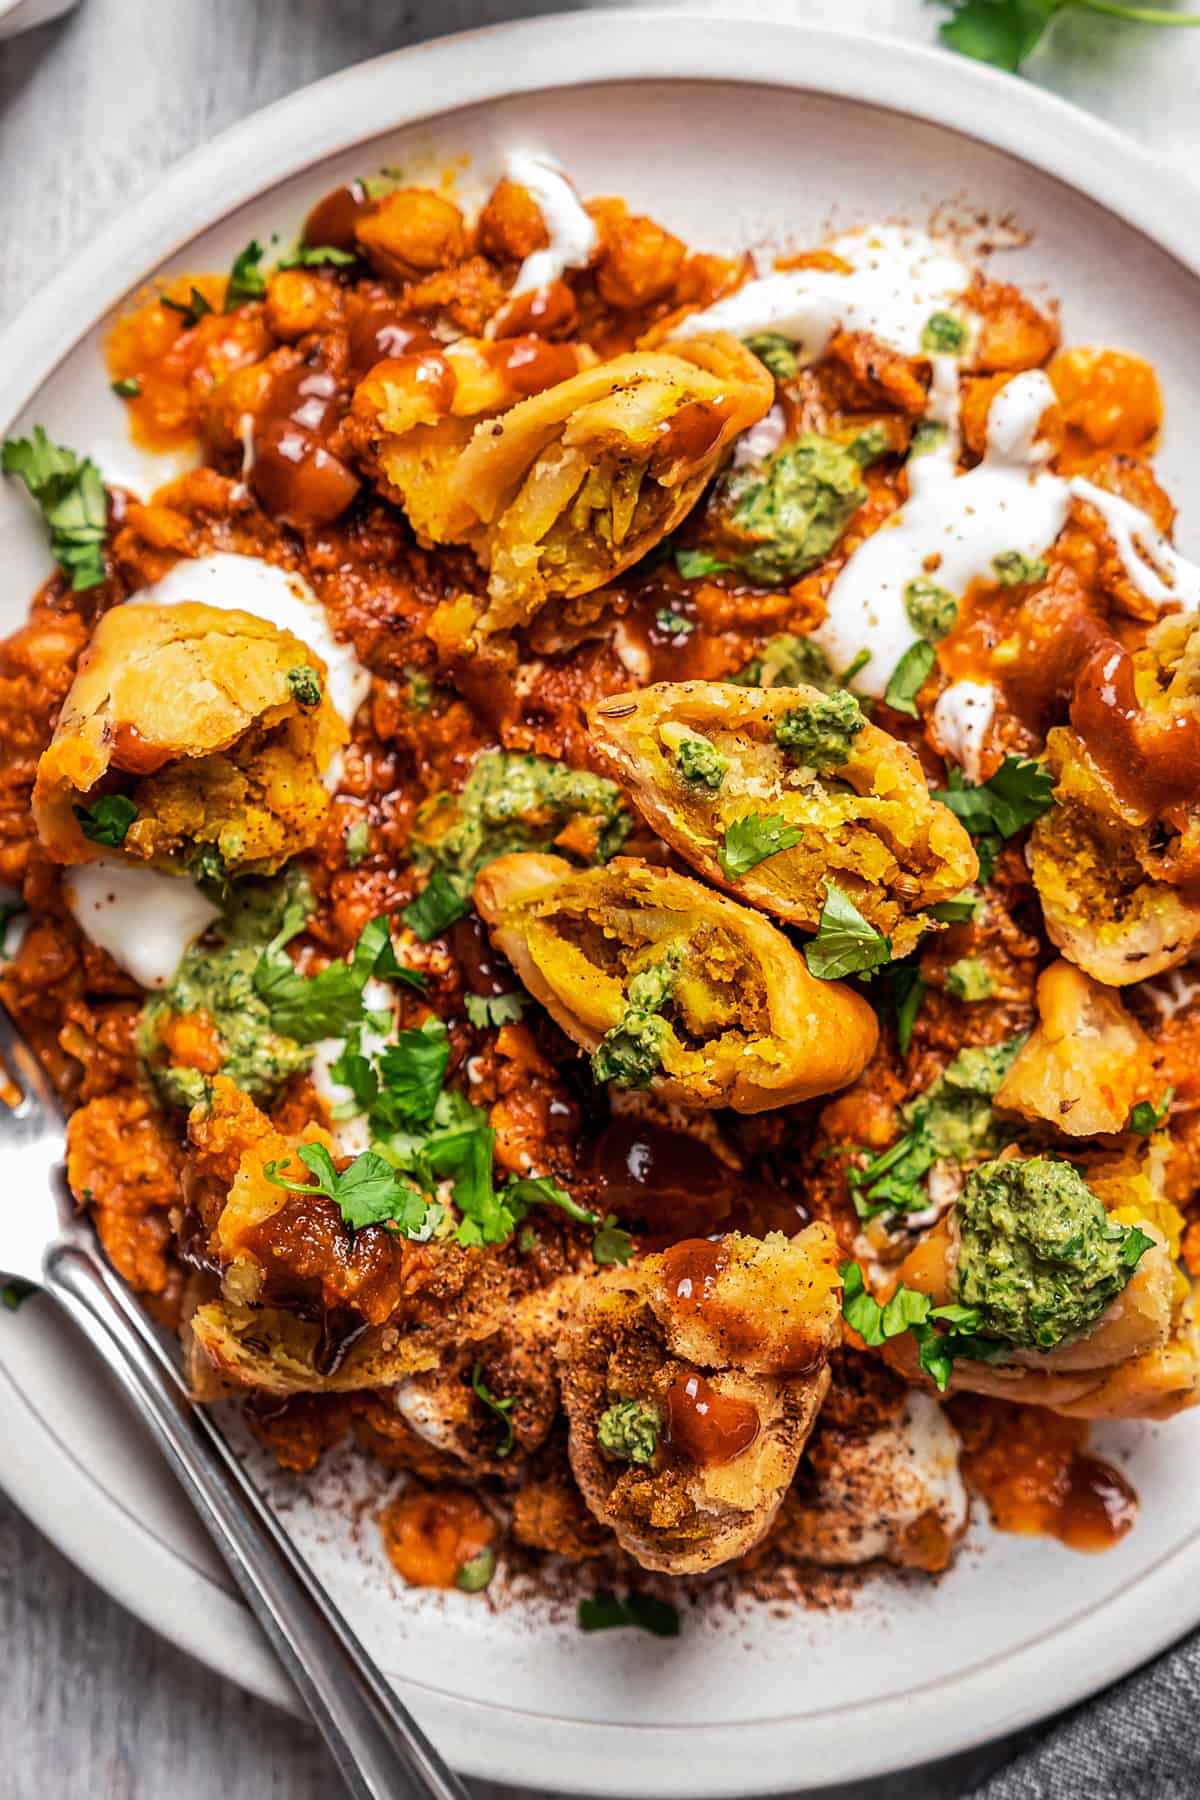 Overhead shot of Indian samosa chaat on a plate.